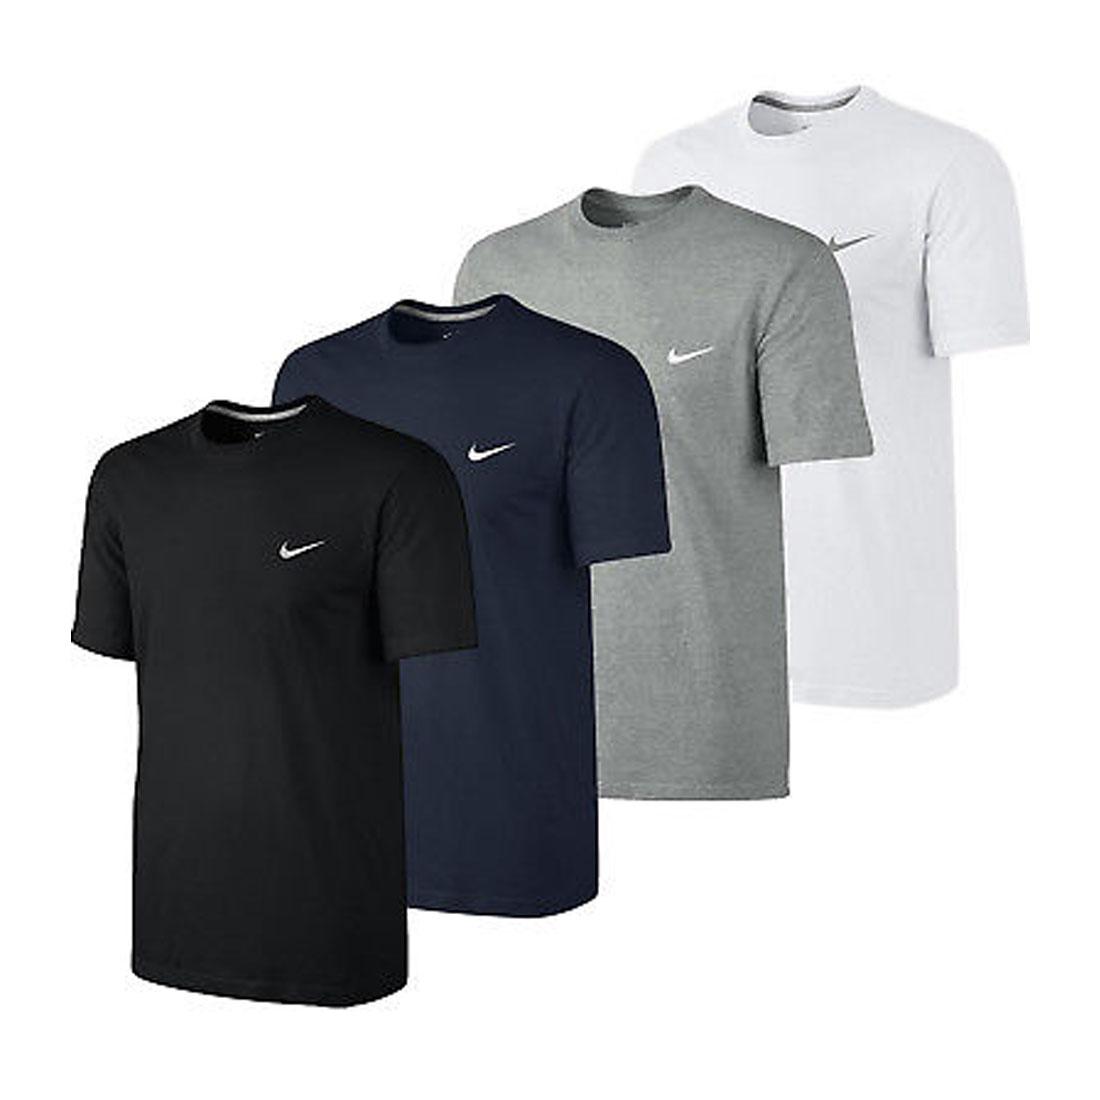 nike t shirt sport buy clothes shoes online